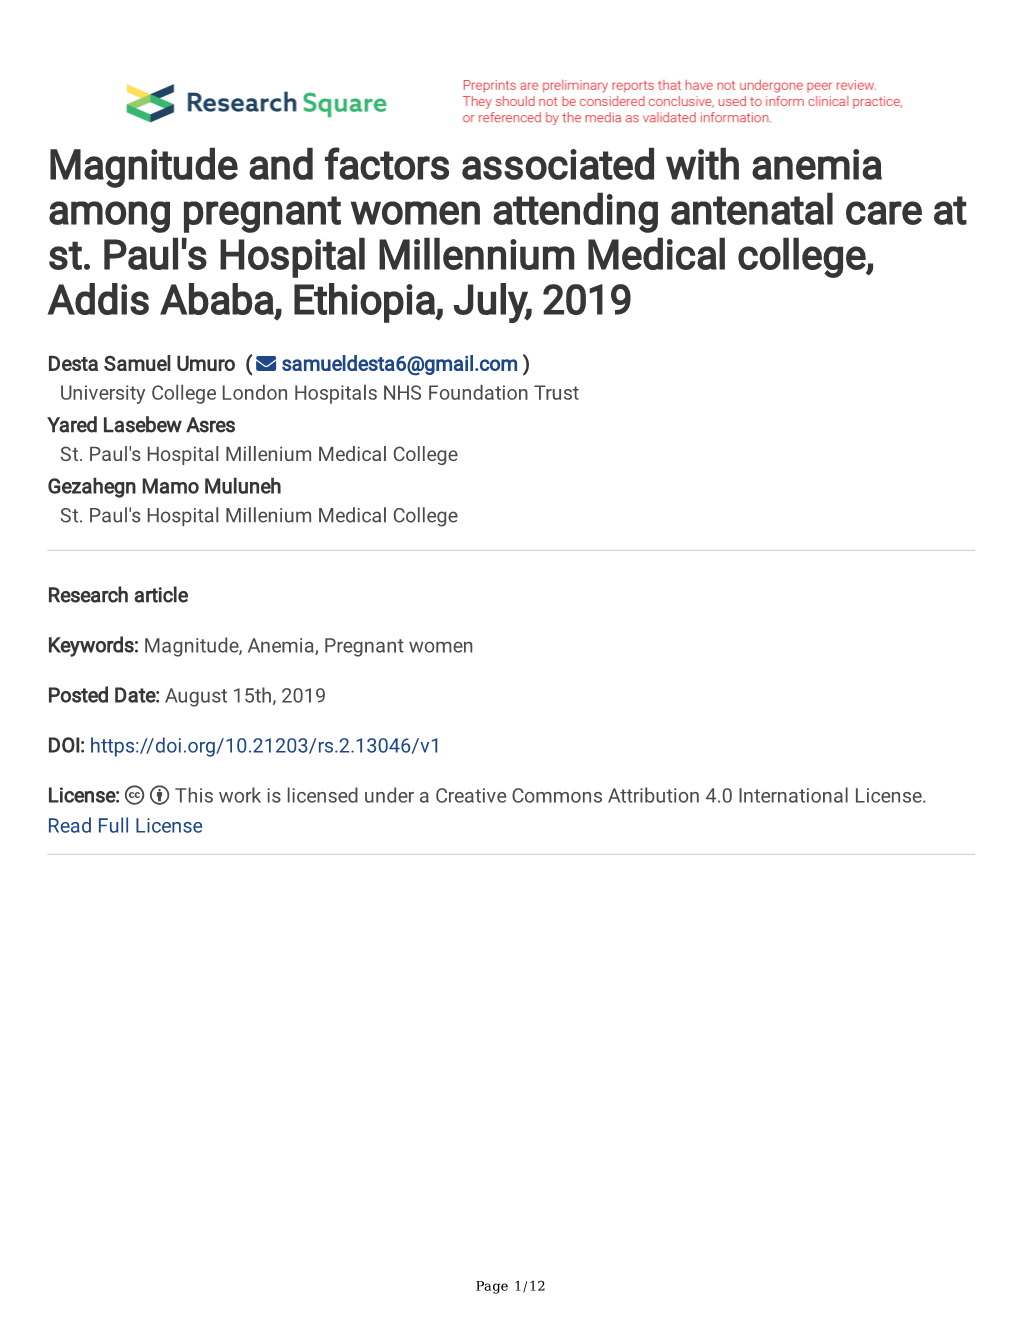 Magnitude and Factors Associated with Anemia Among Pregnant Women Attending Antenatal Care at St. Paul's Hospital Millennium